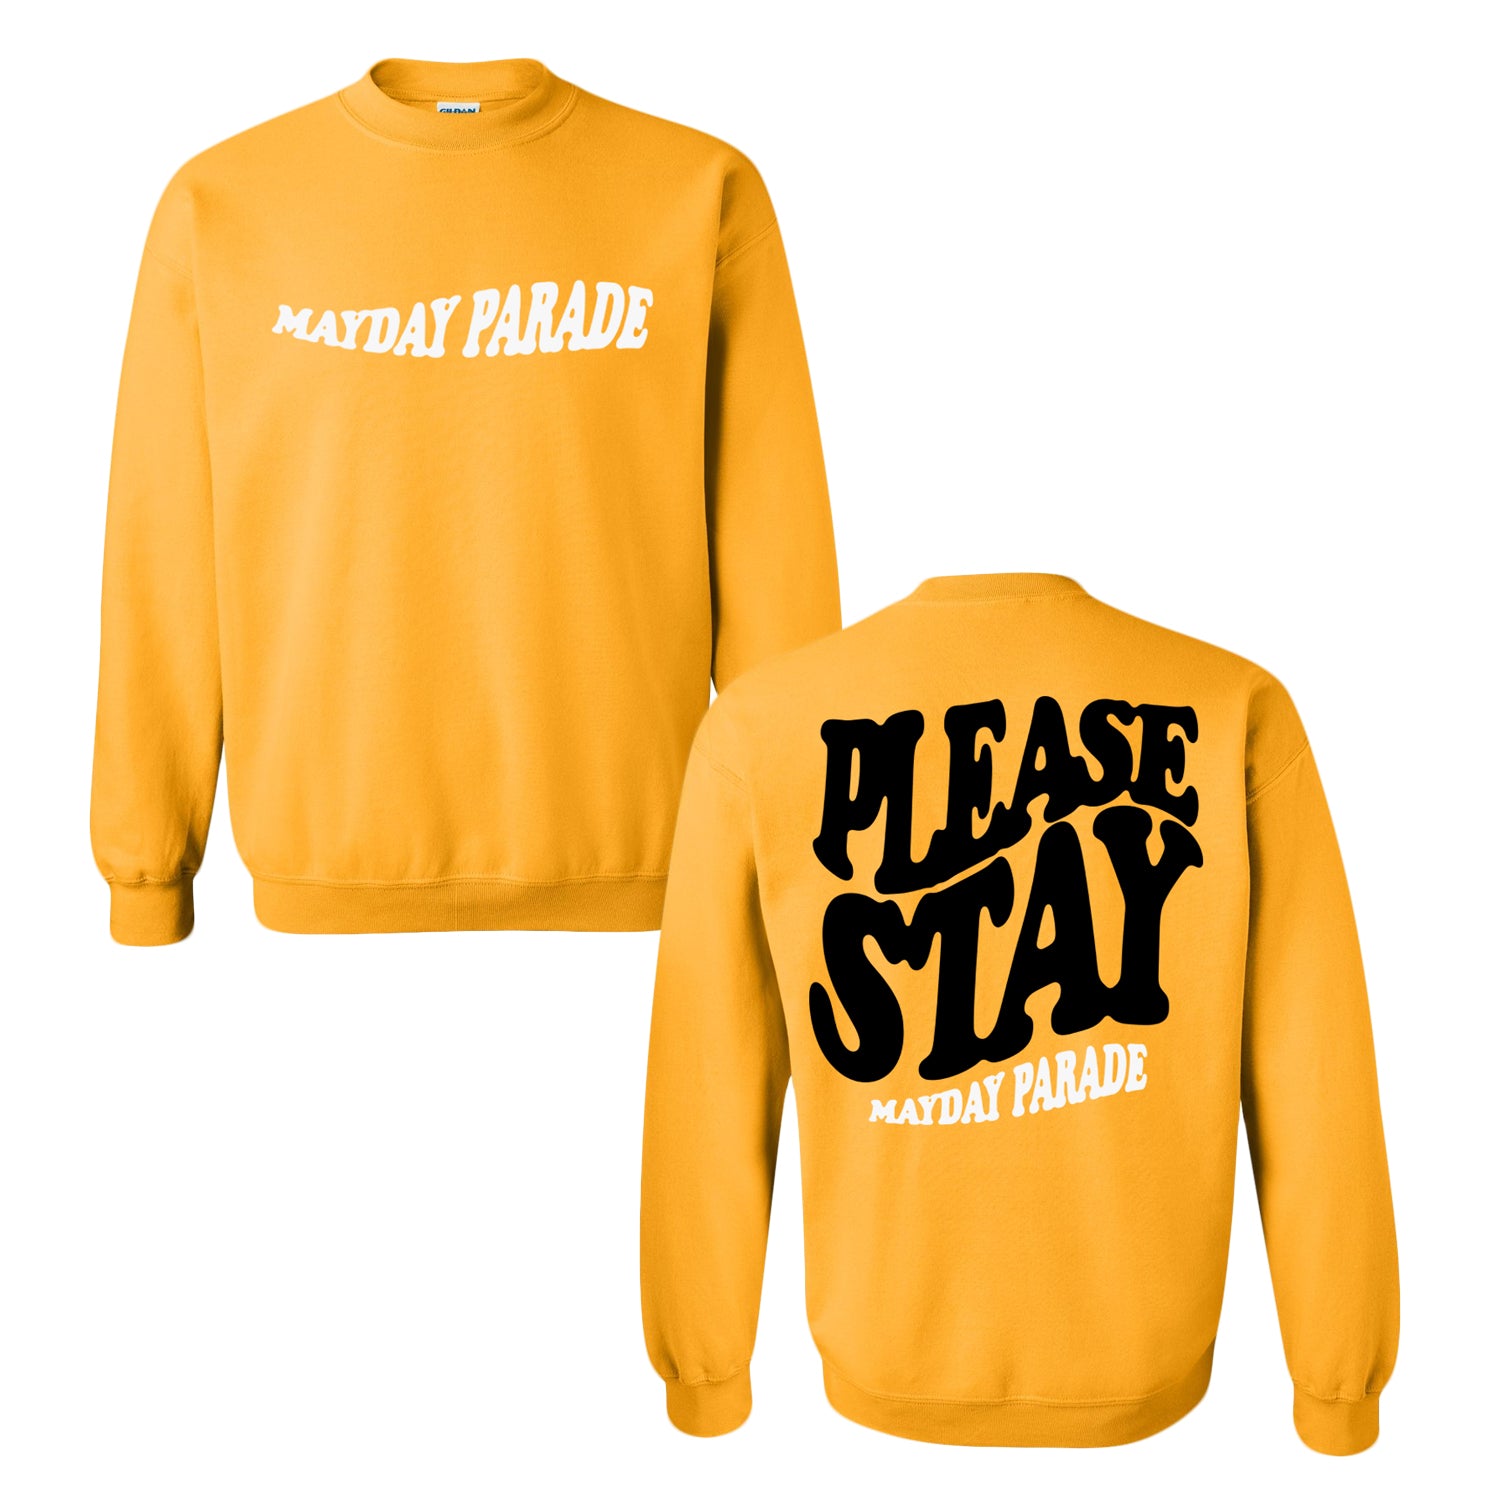 image of the front and back of a gold crewneck sweatshirt on a white backgound. front of the crewneck is on the left and has a white print across the chest that says mayday parade. the back of the crewneck is on the right and has a full back print in black that says please stay and below in white says mayday parade